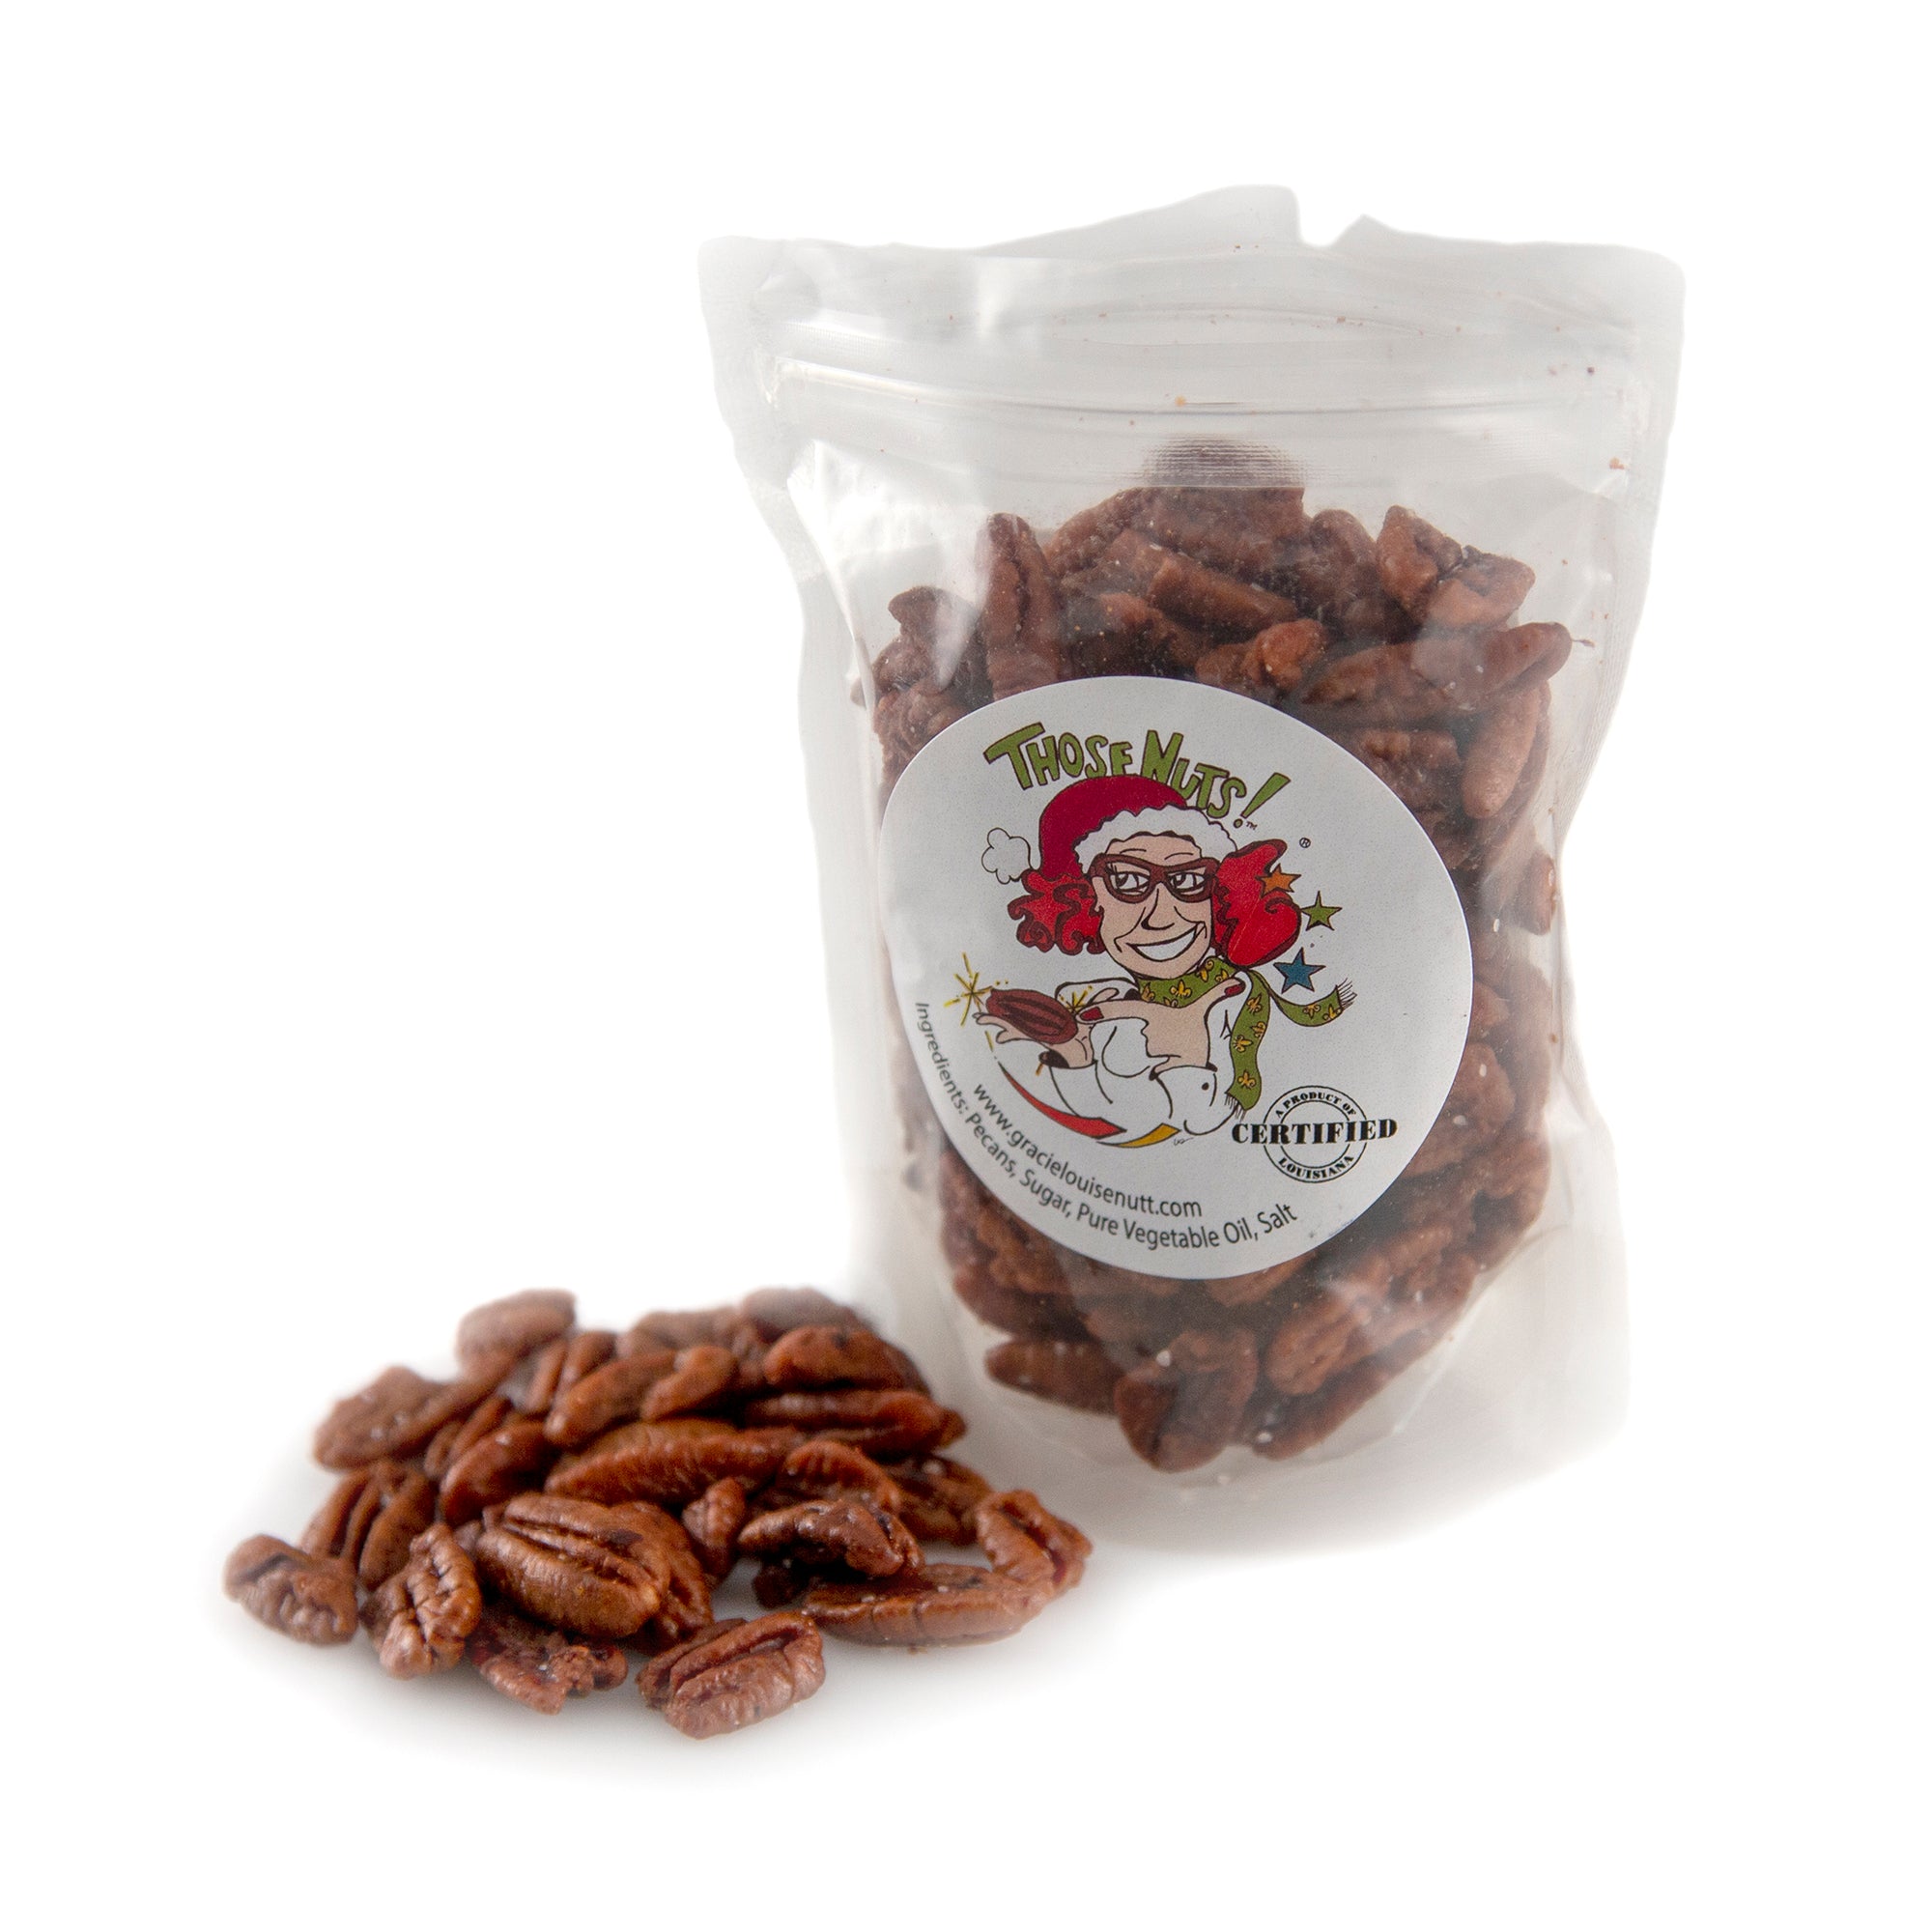 Those Nuts - Premiere_Louisiana Products - Red Stick Spice Company